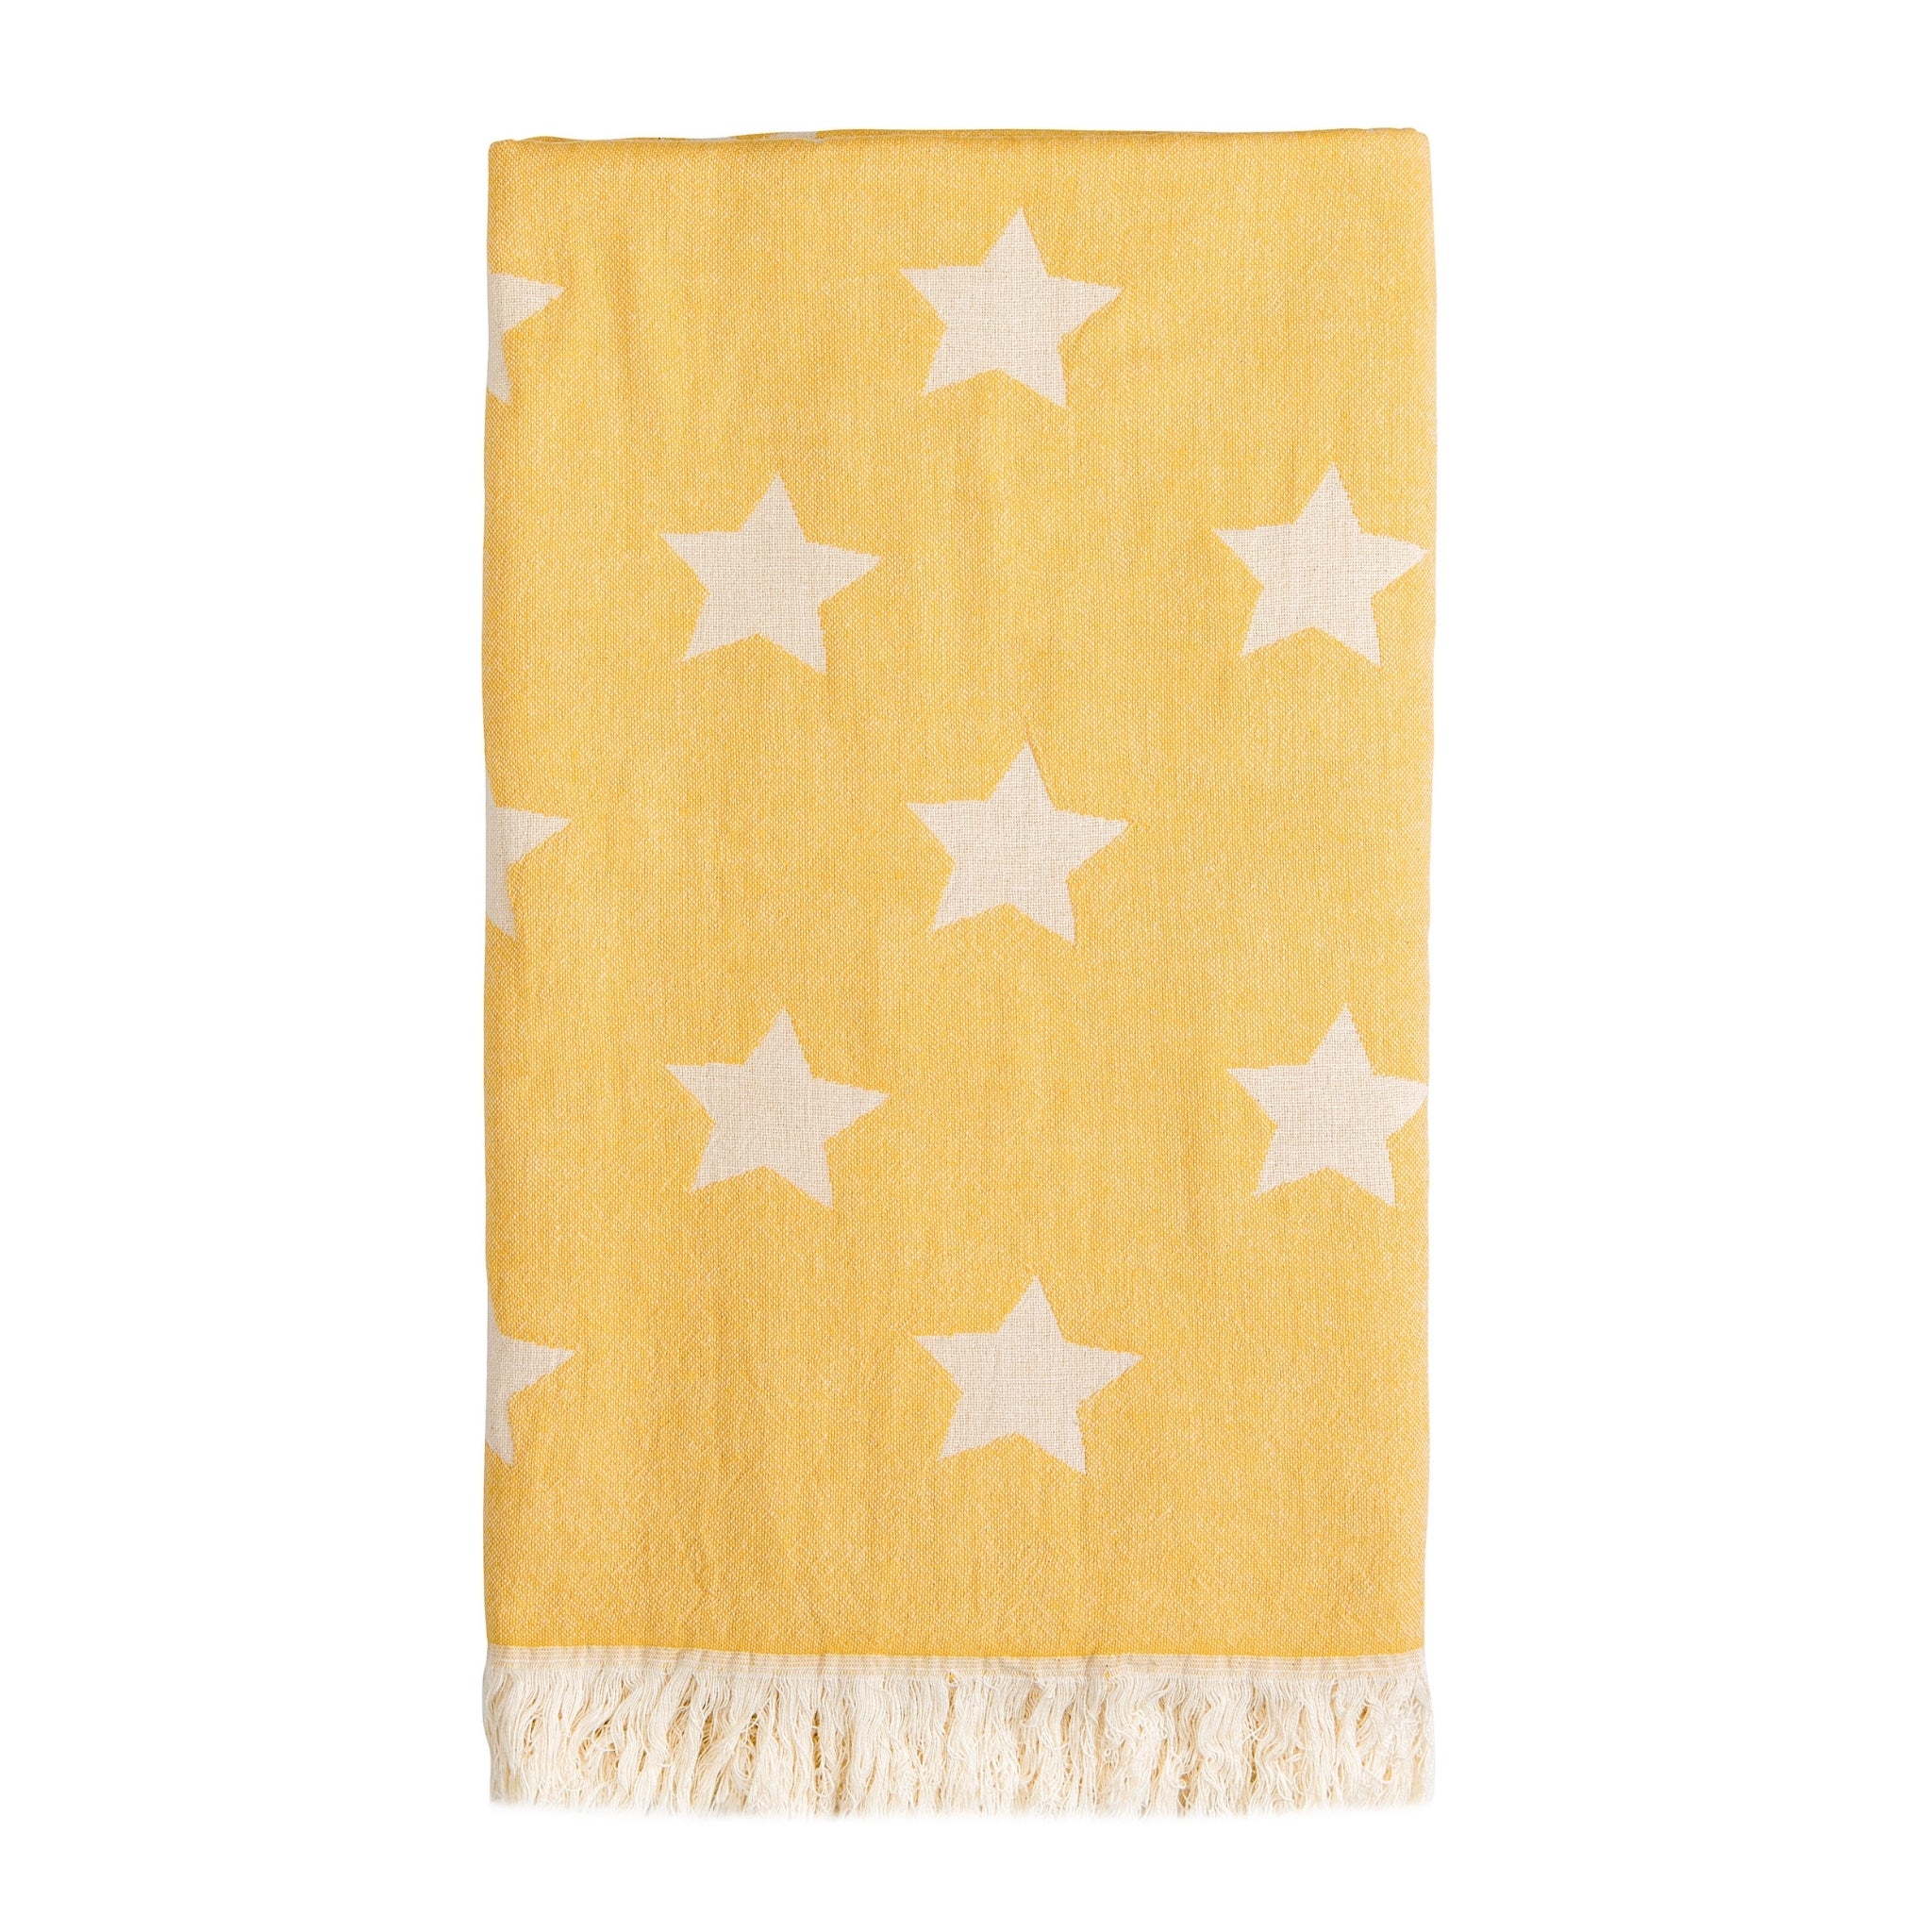 100% cotton hammam towel, in a sunny yellow with white stars design. Fringing at both ends.